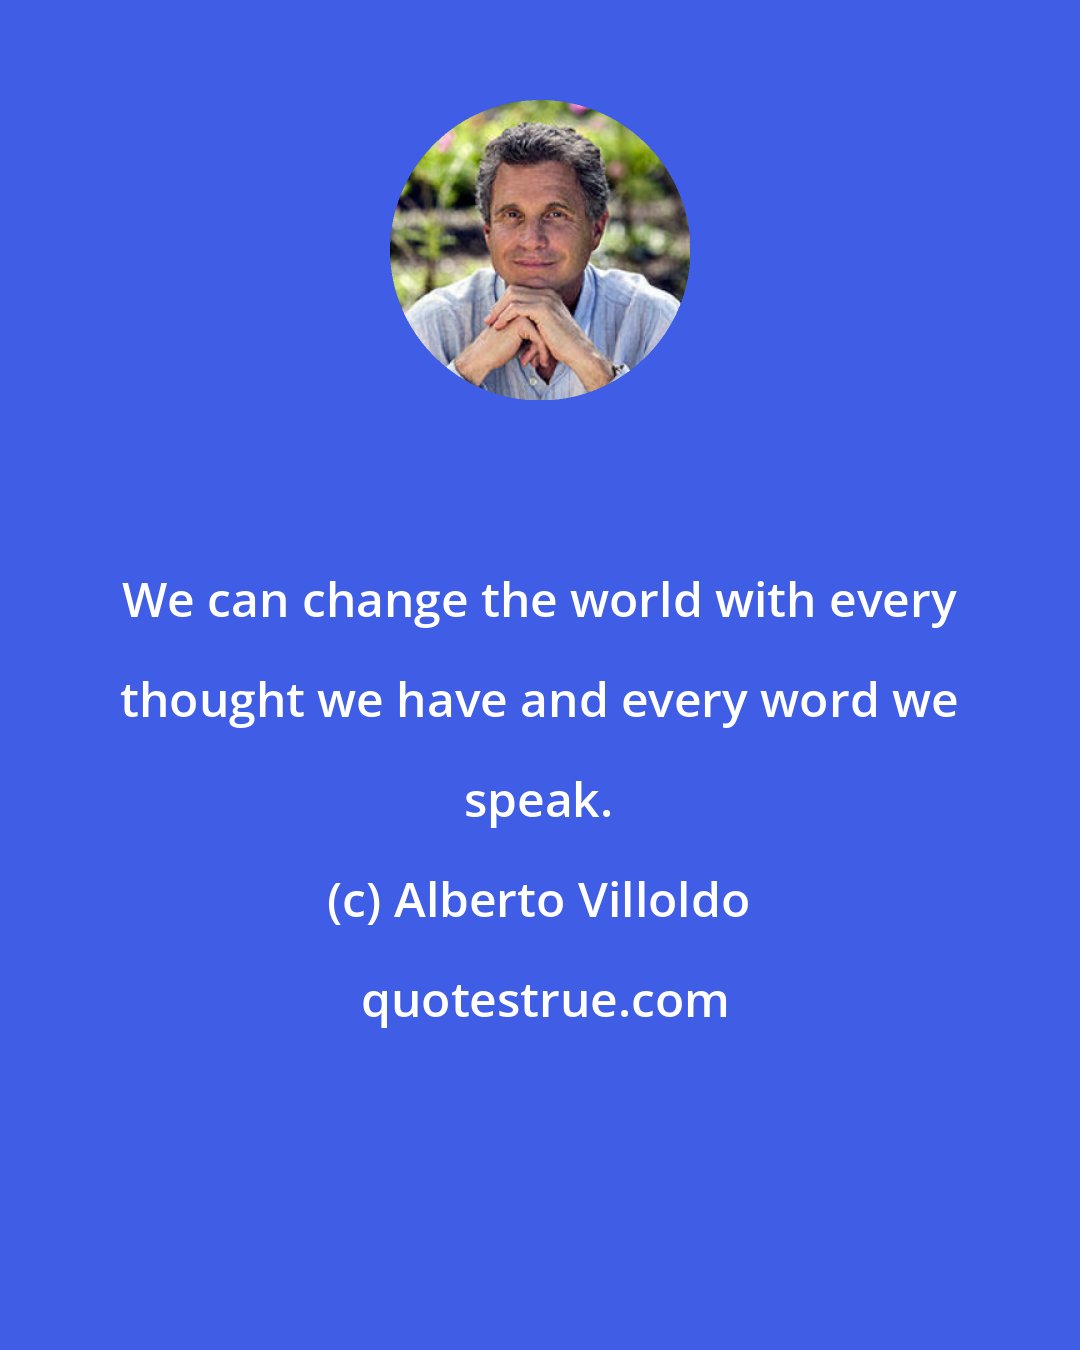 Alberto Villoldo: We can change the world with every thought we have and every word we speak.